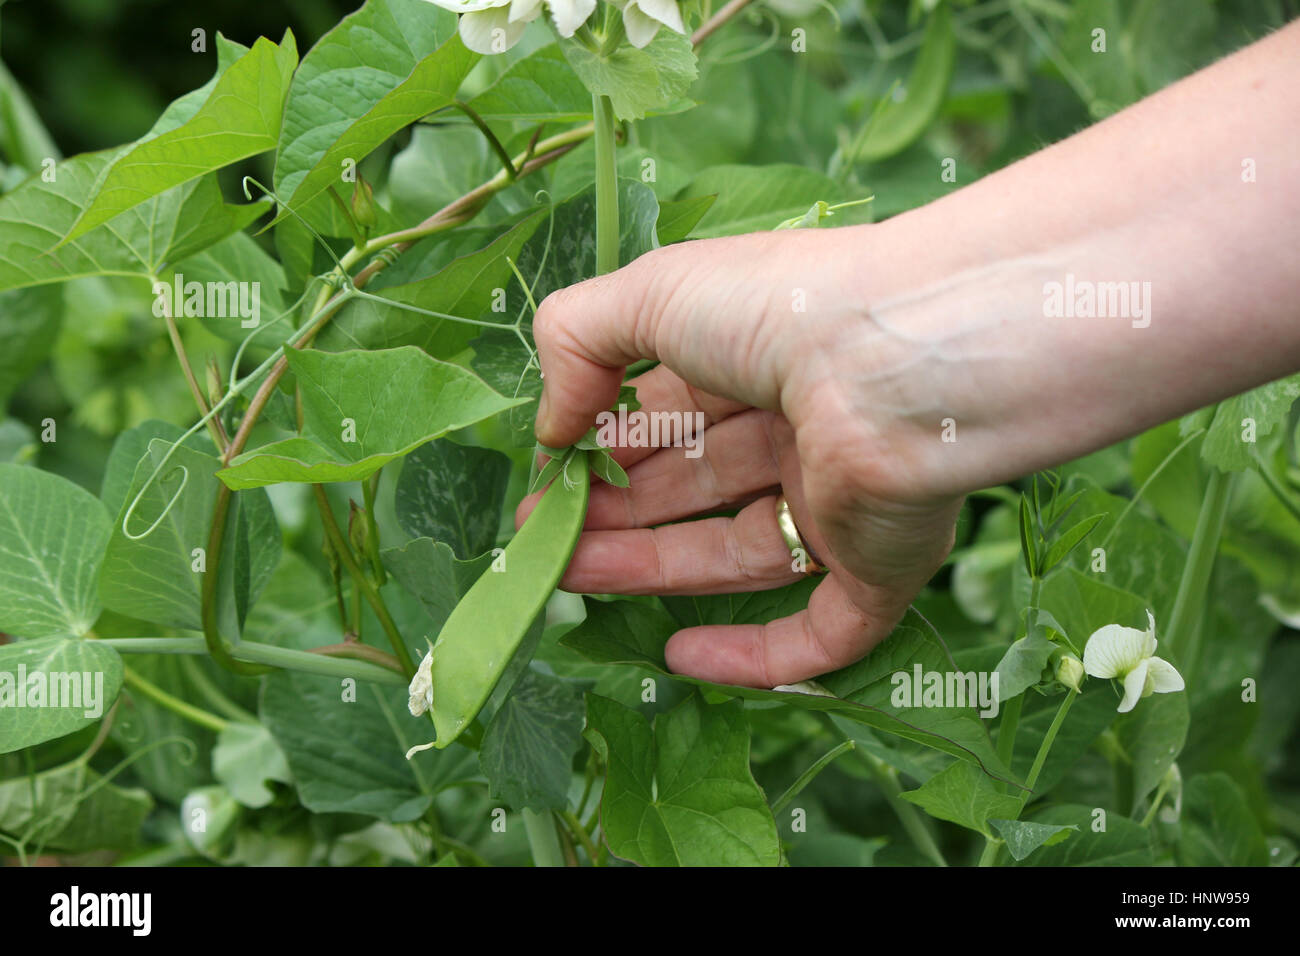 A hand reaches out to pick peas from a pea crop on a farm Stock Photo